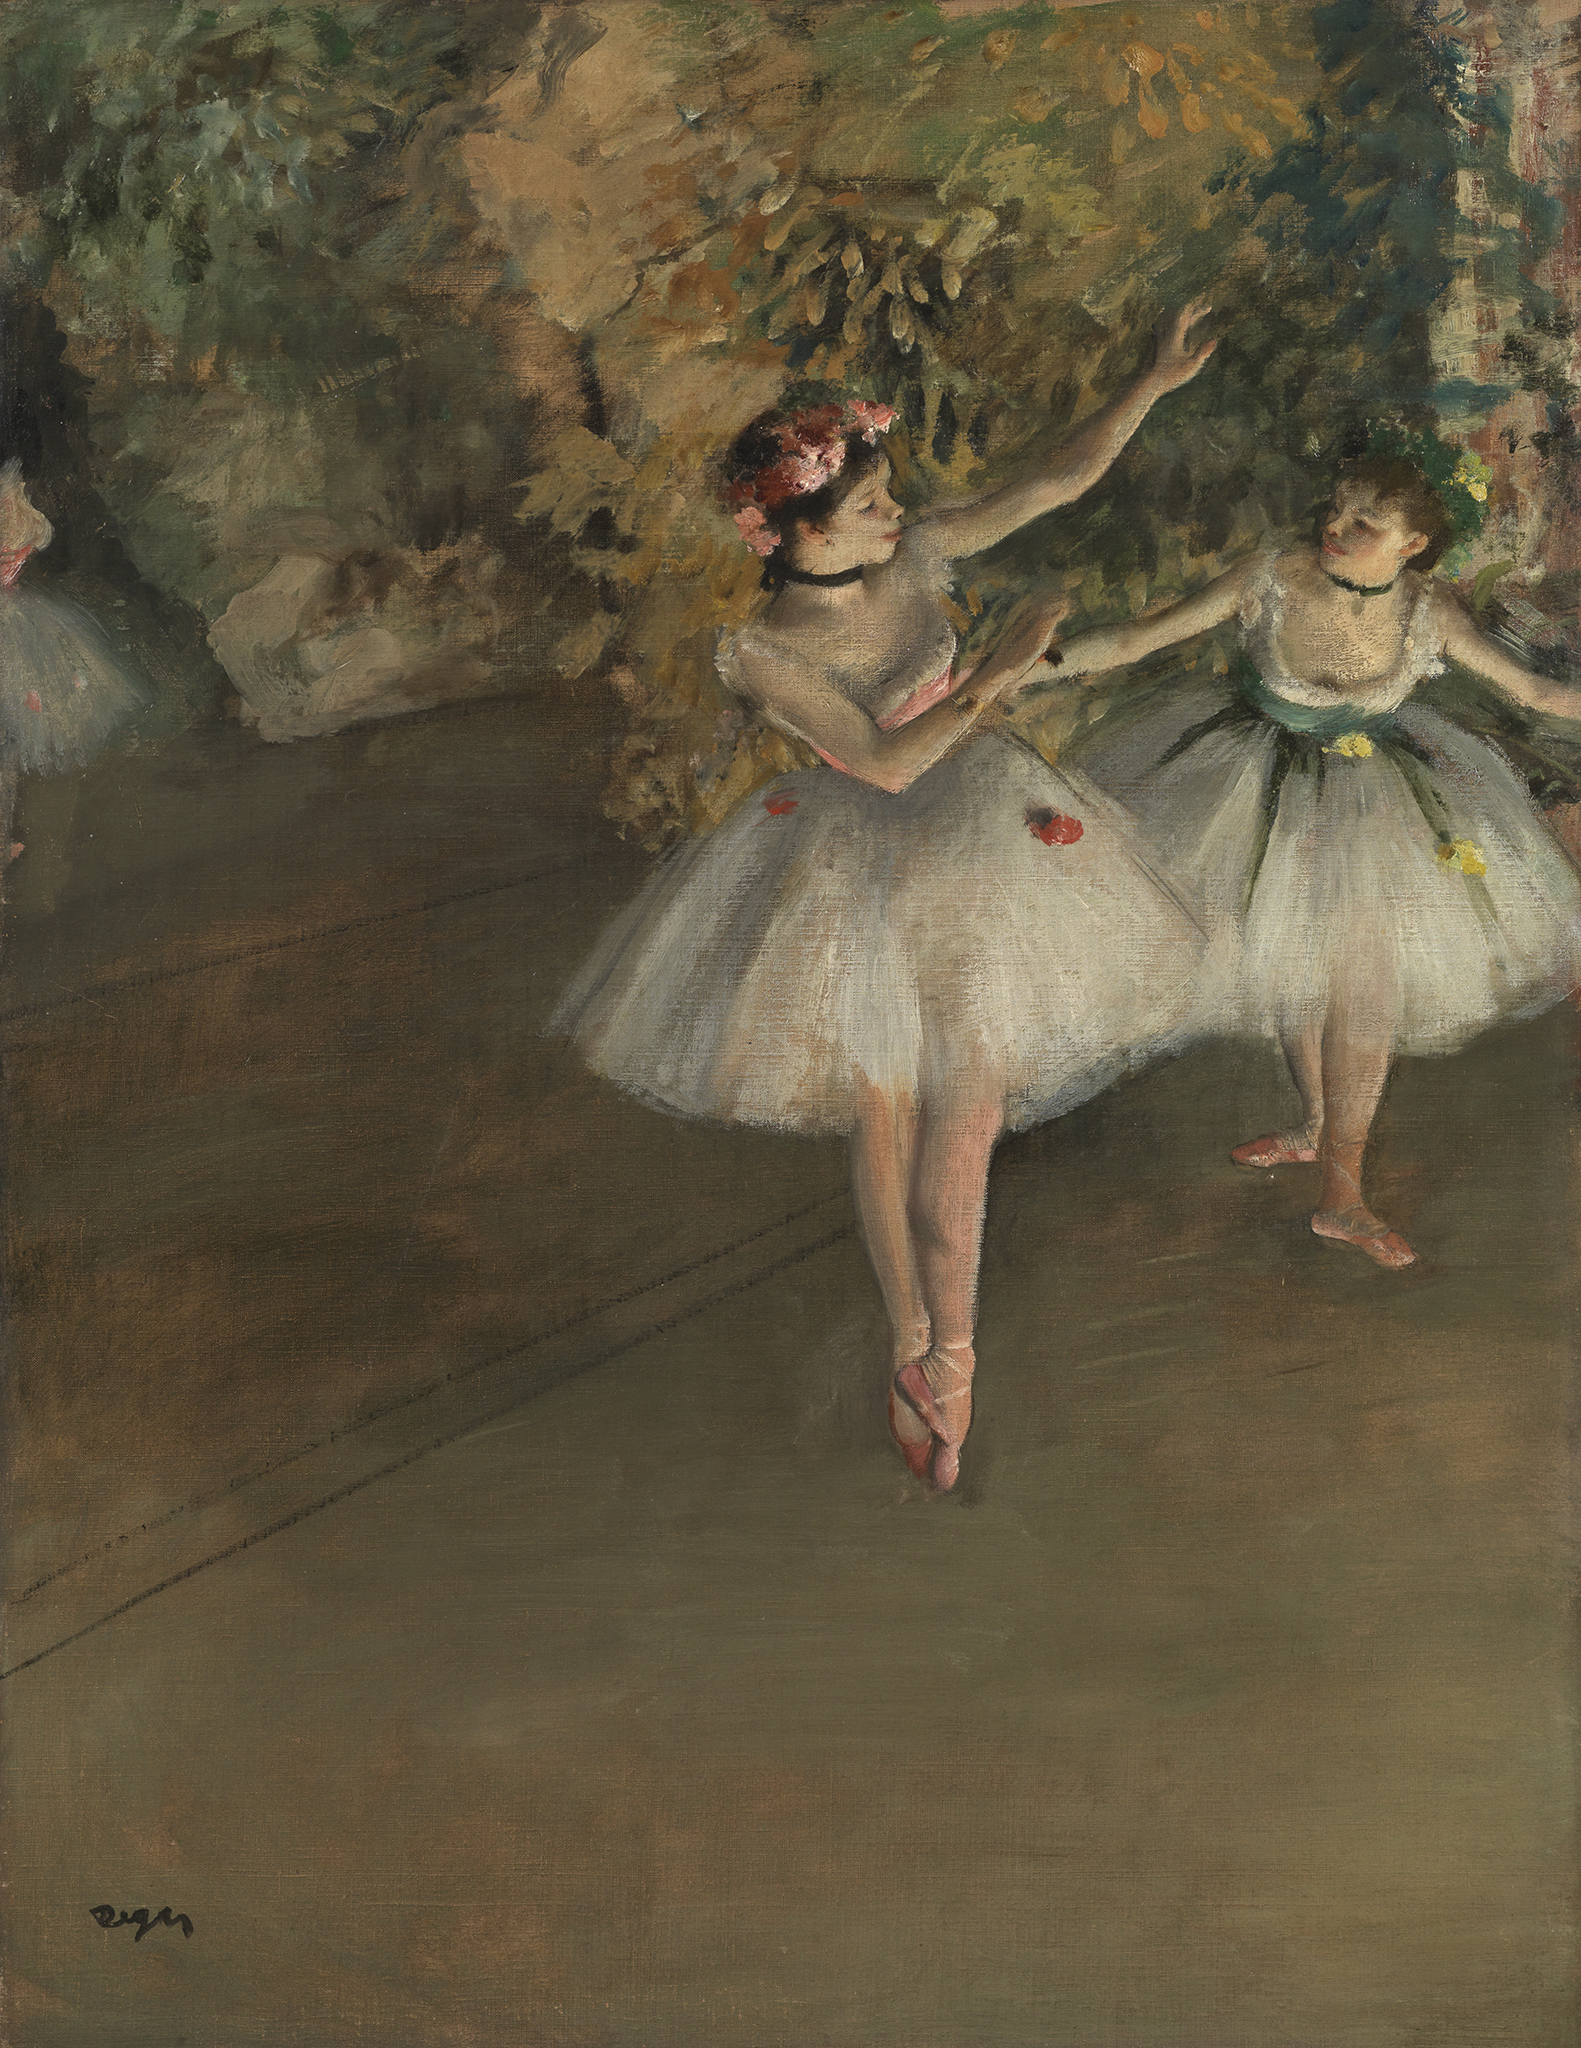 A pastel drawing depicting two young girls performing a ballet act on a wooden stage.  The girl in front stands up on her tippy-toes and rises both of her arms up at an angle. She wears a crown made out of red flowers along with a white tutu. Behind her, another girl seems to be slightly bent forward with her arms stretched out to her sides. She wears a crown with green and yellow flowers along with a white tutu. They appear to be in the middle of a ballet recital. The background consists of green and brown leaves.